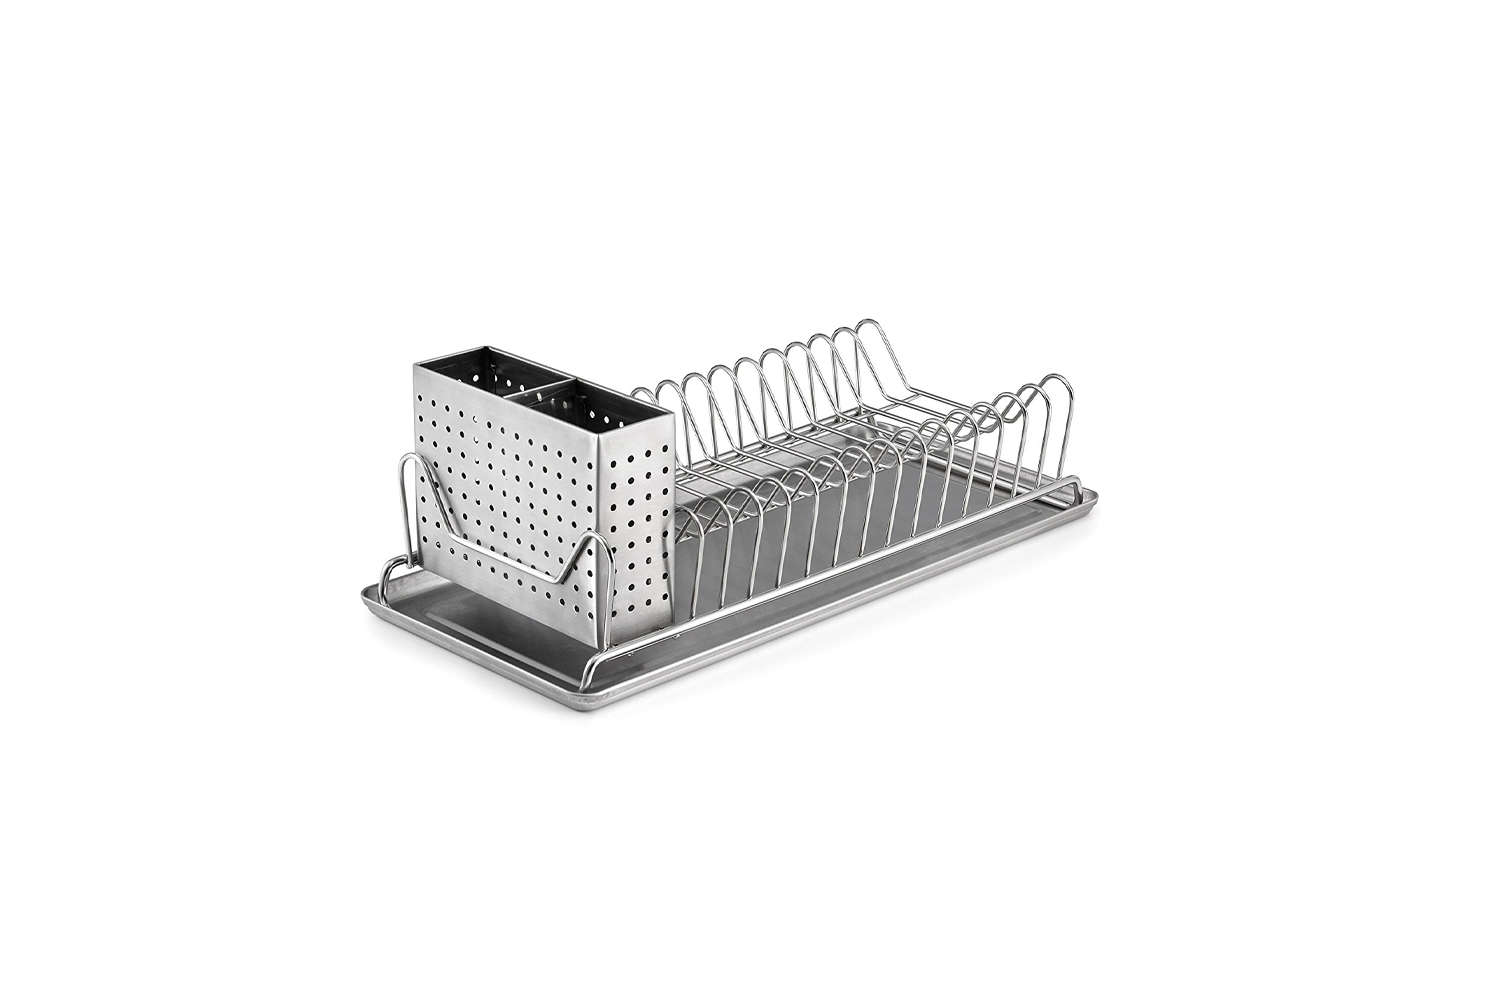 Dish Rack Small Space